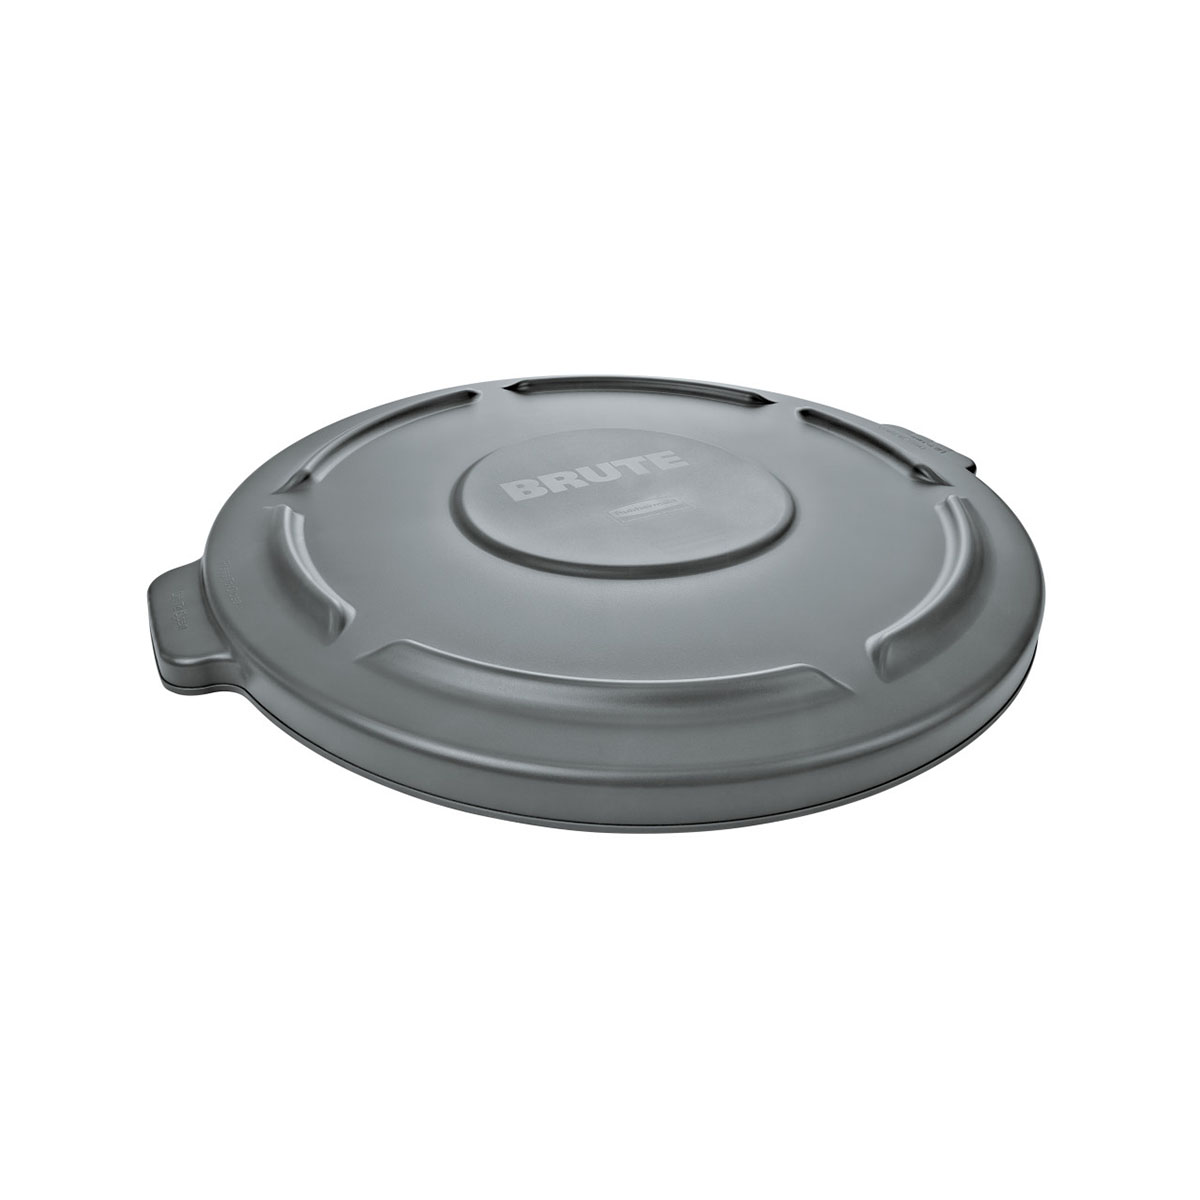 Rubbermaid Rubbermaid FG264560 Lid (Only) for 44-Gallon Round Brute Container # 2643 - Gray